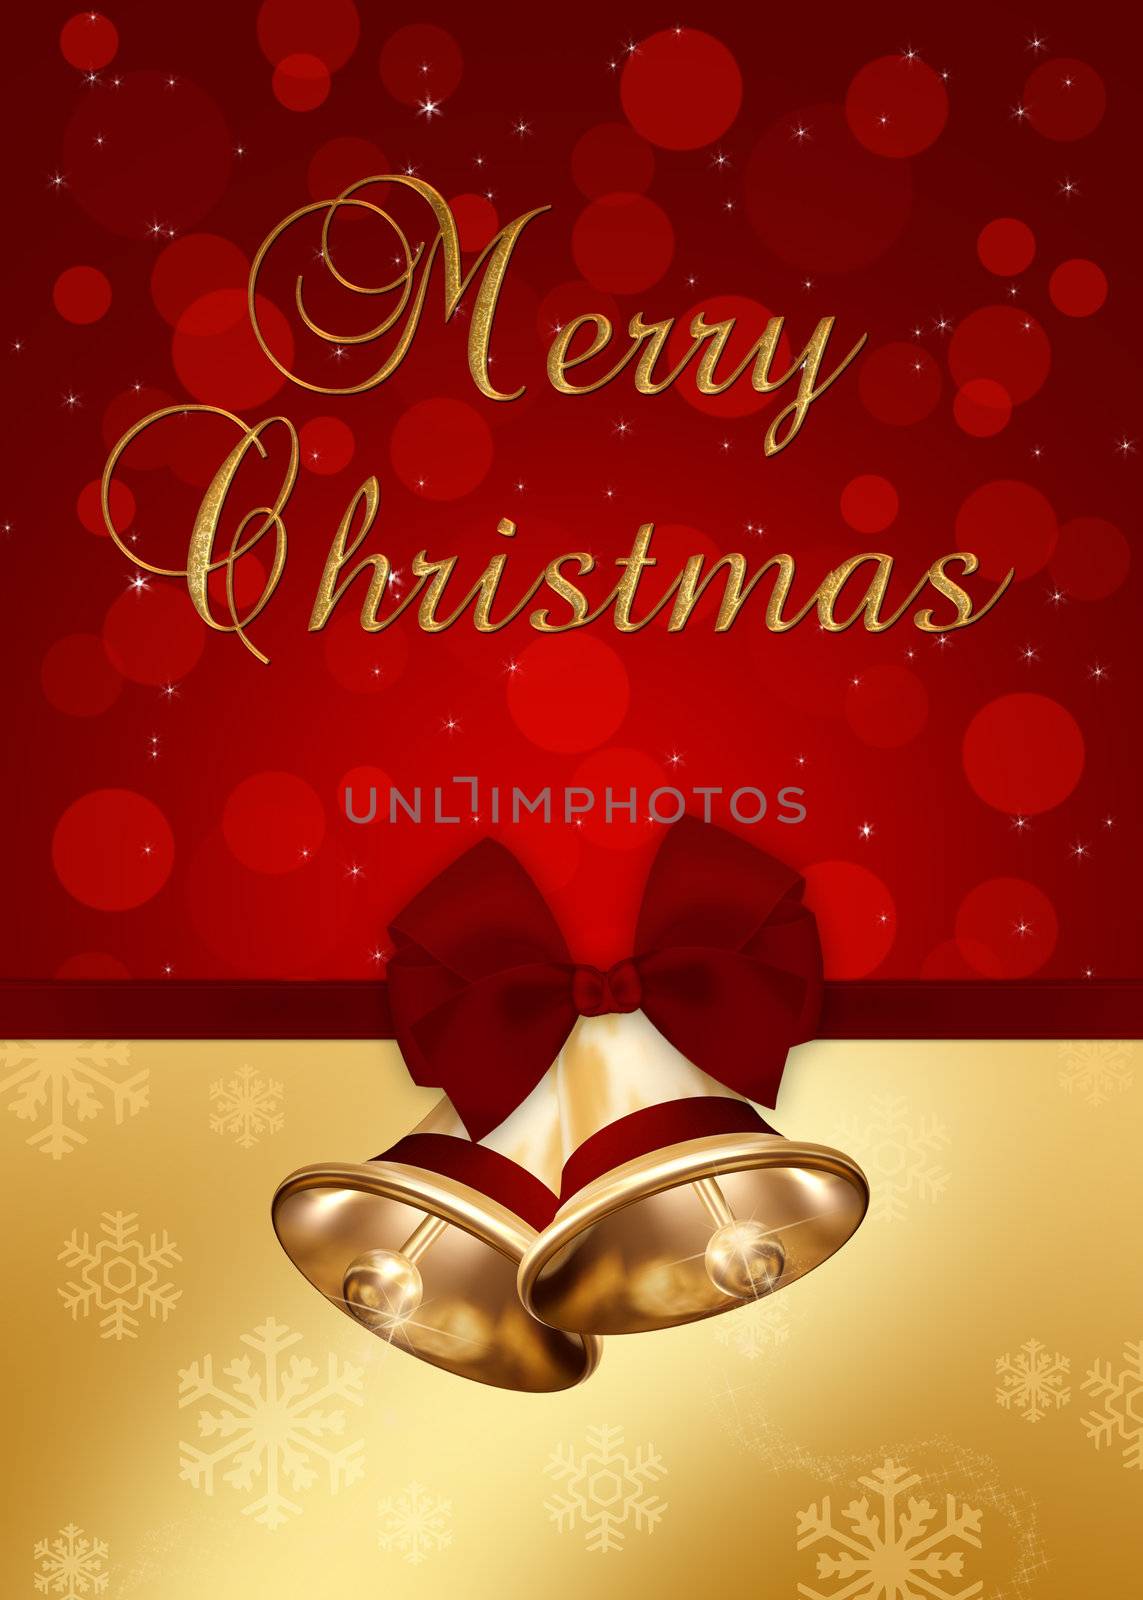 Elegant and unique Christmas illustration with 2 golden Christmas bells and red bow and ribbon on 2 different
backgrounds: a red bokeh background and a golden snowflakes background.